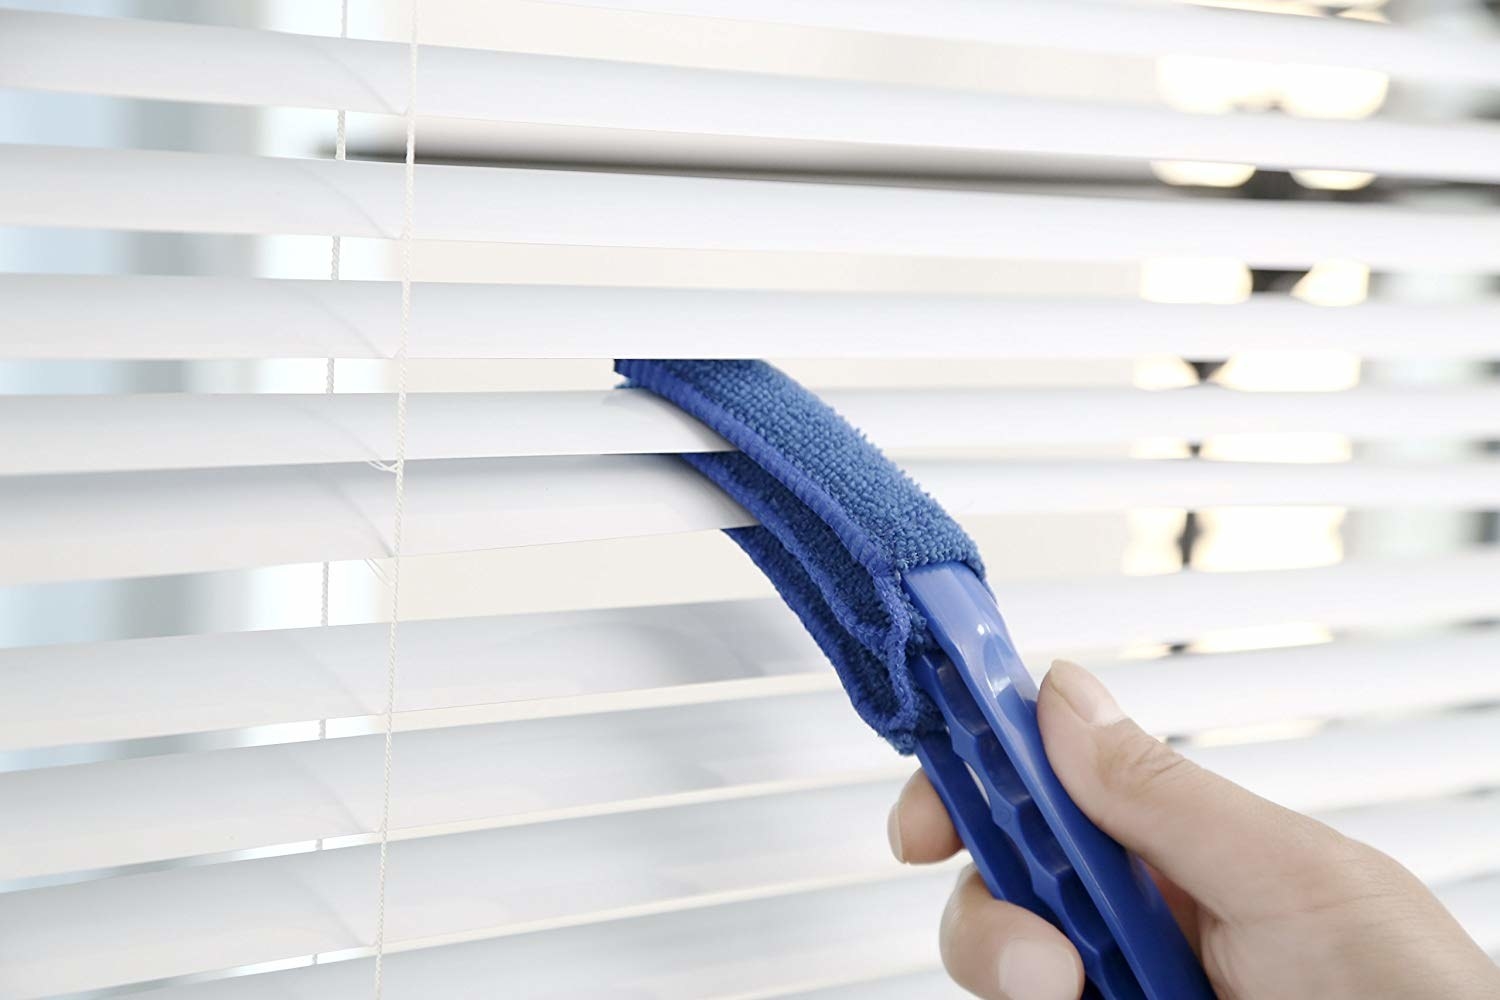 person using the mini duster on blinds with microfiber-covered arms that slip between each blinds strip